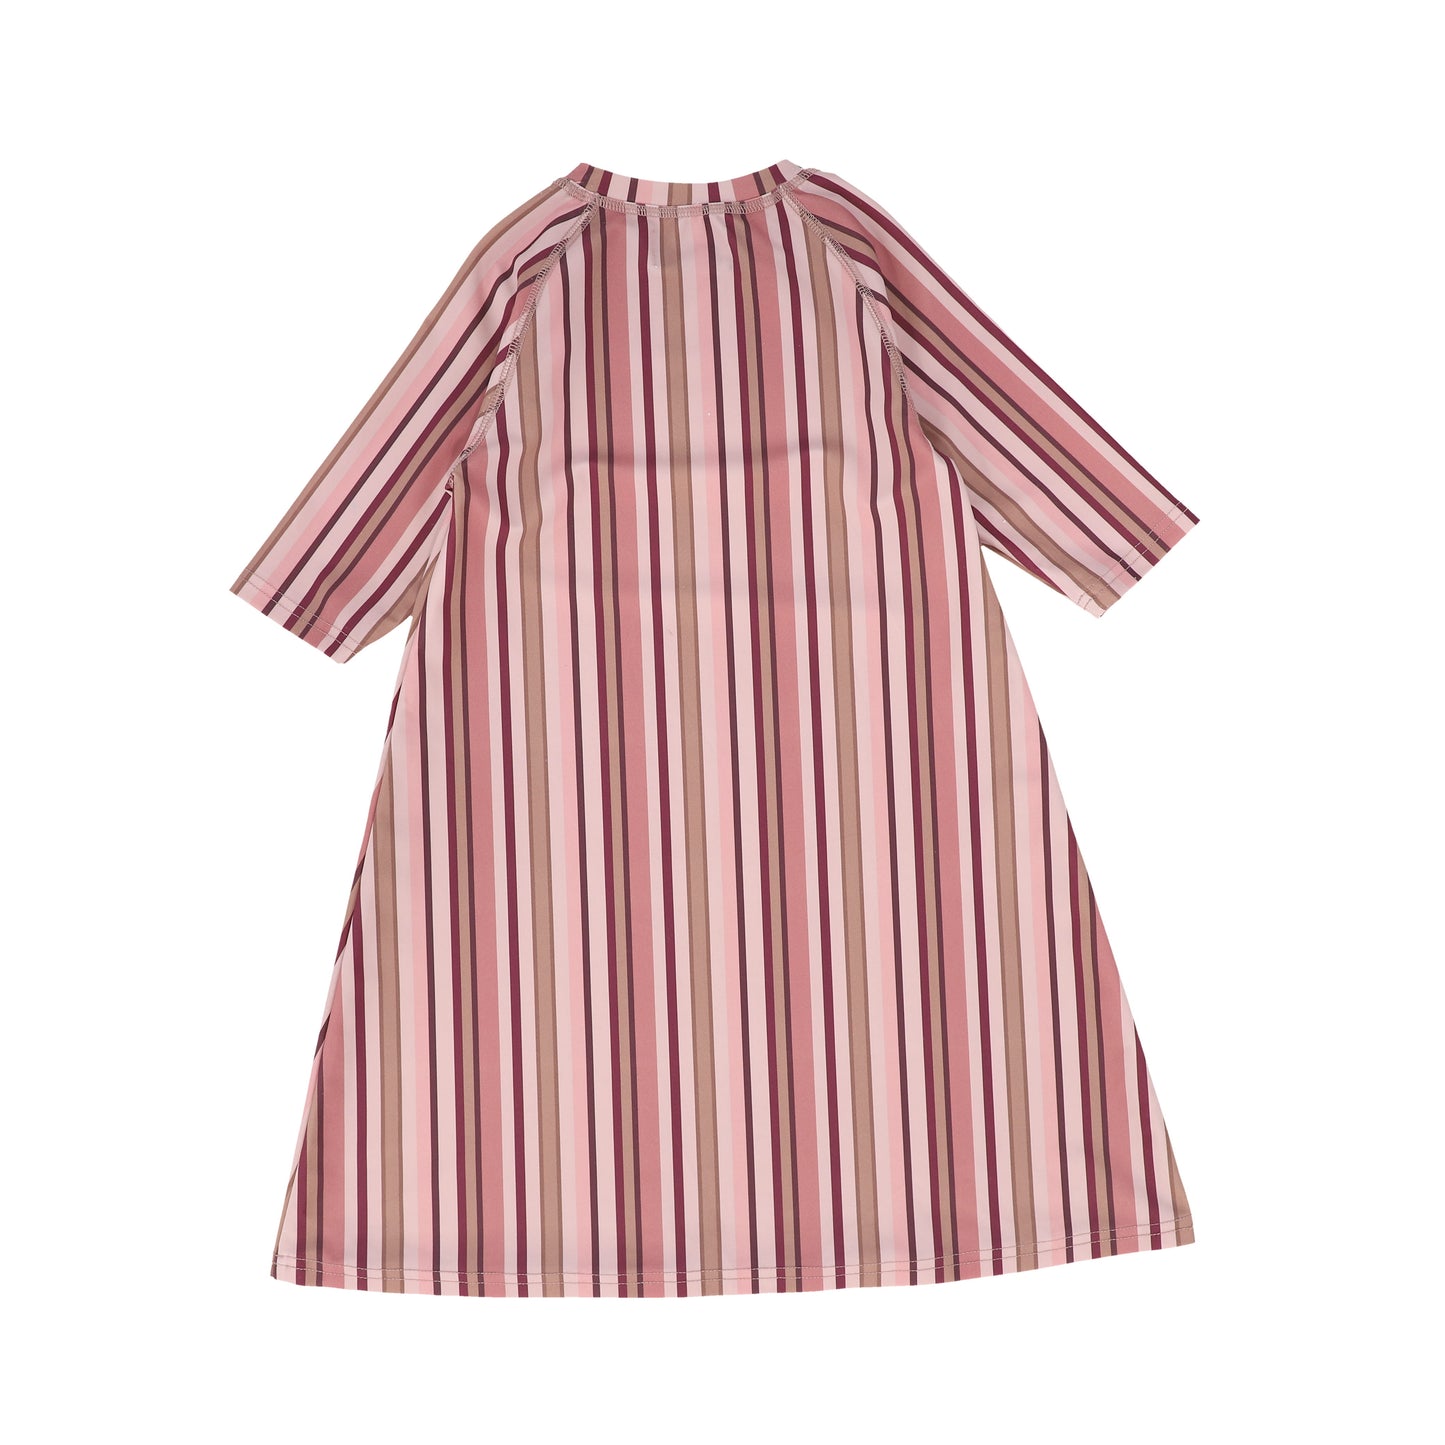 WATER CLUB BURGUNDY  STRIPED COVER UP